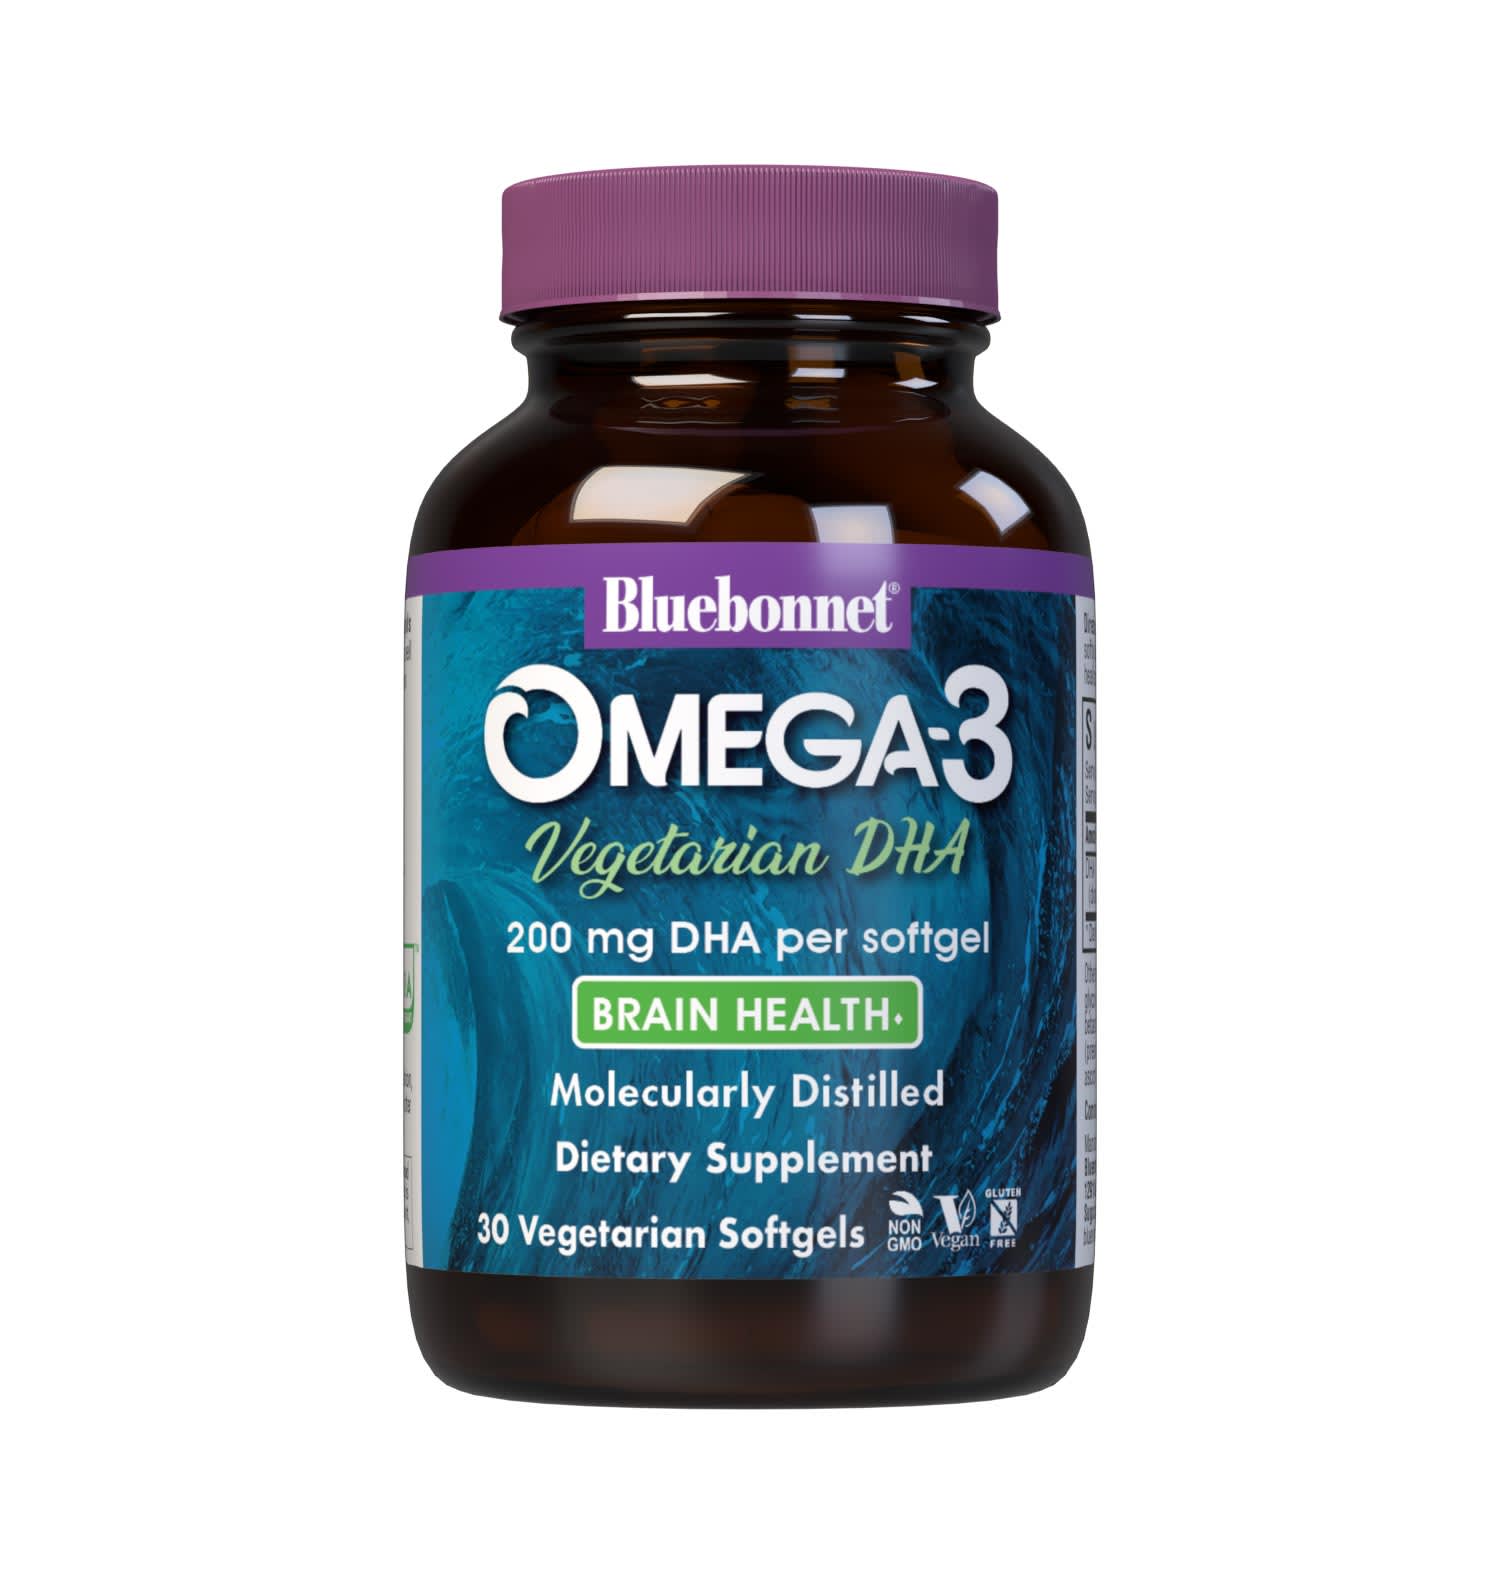 Bluebonnet’s Omega-3 Vegetarian DHA 200 mg 30 Vegetarian Softgels are formulated with life’sDHA, to help support a healthy mood as well as brain and eye function by utilzing a catch-free docosahexaenoic acid (DHA) from marine algae. #size_30 count